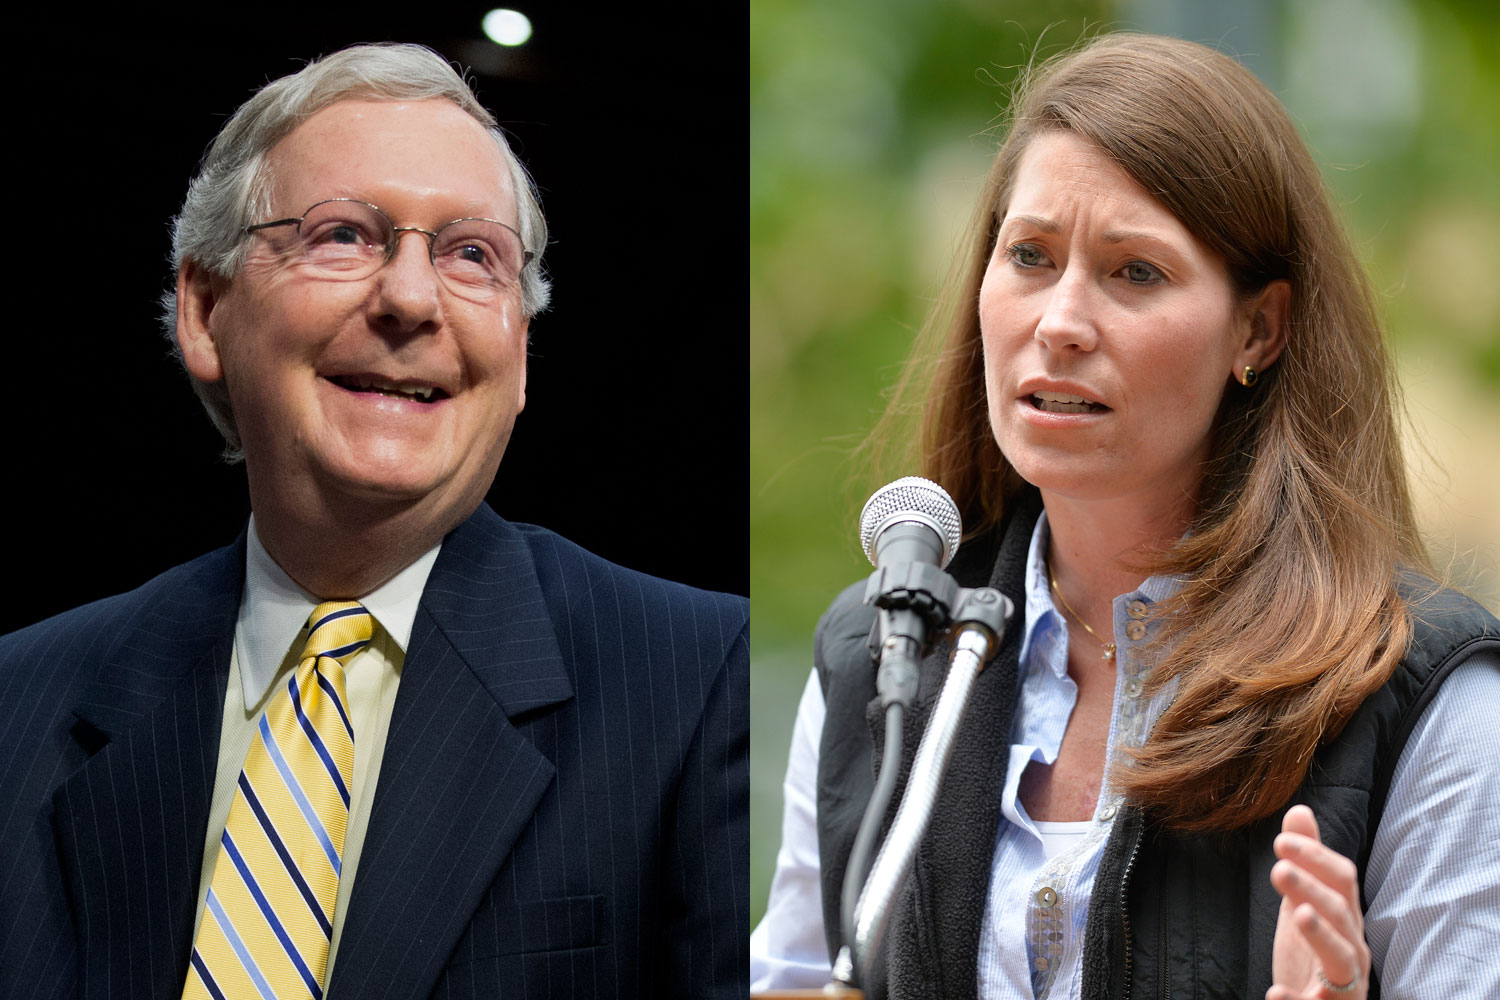 Was Mitch McConnell’s Friend Behind the Clandestine Recording of His Opponent?